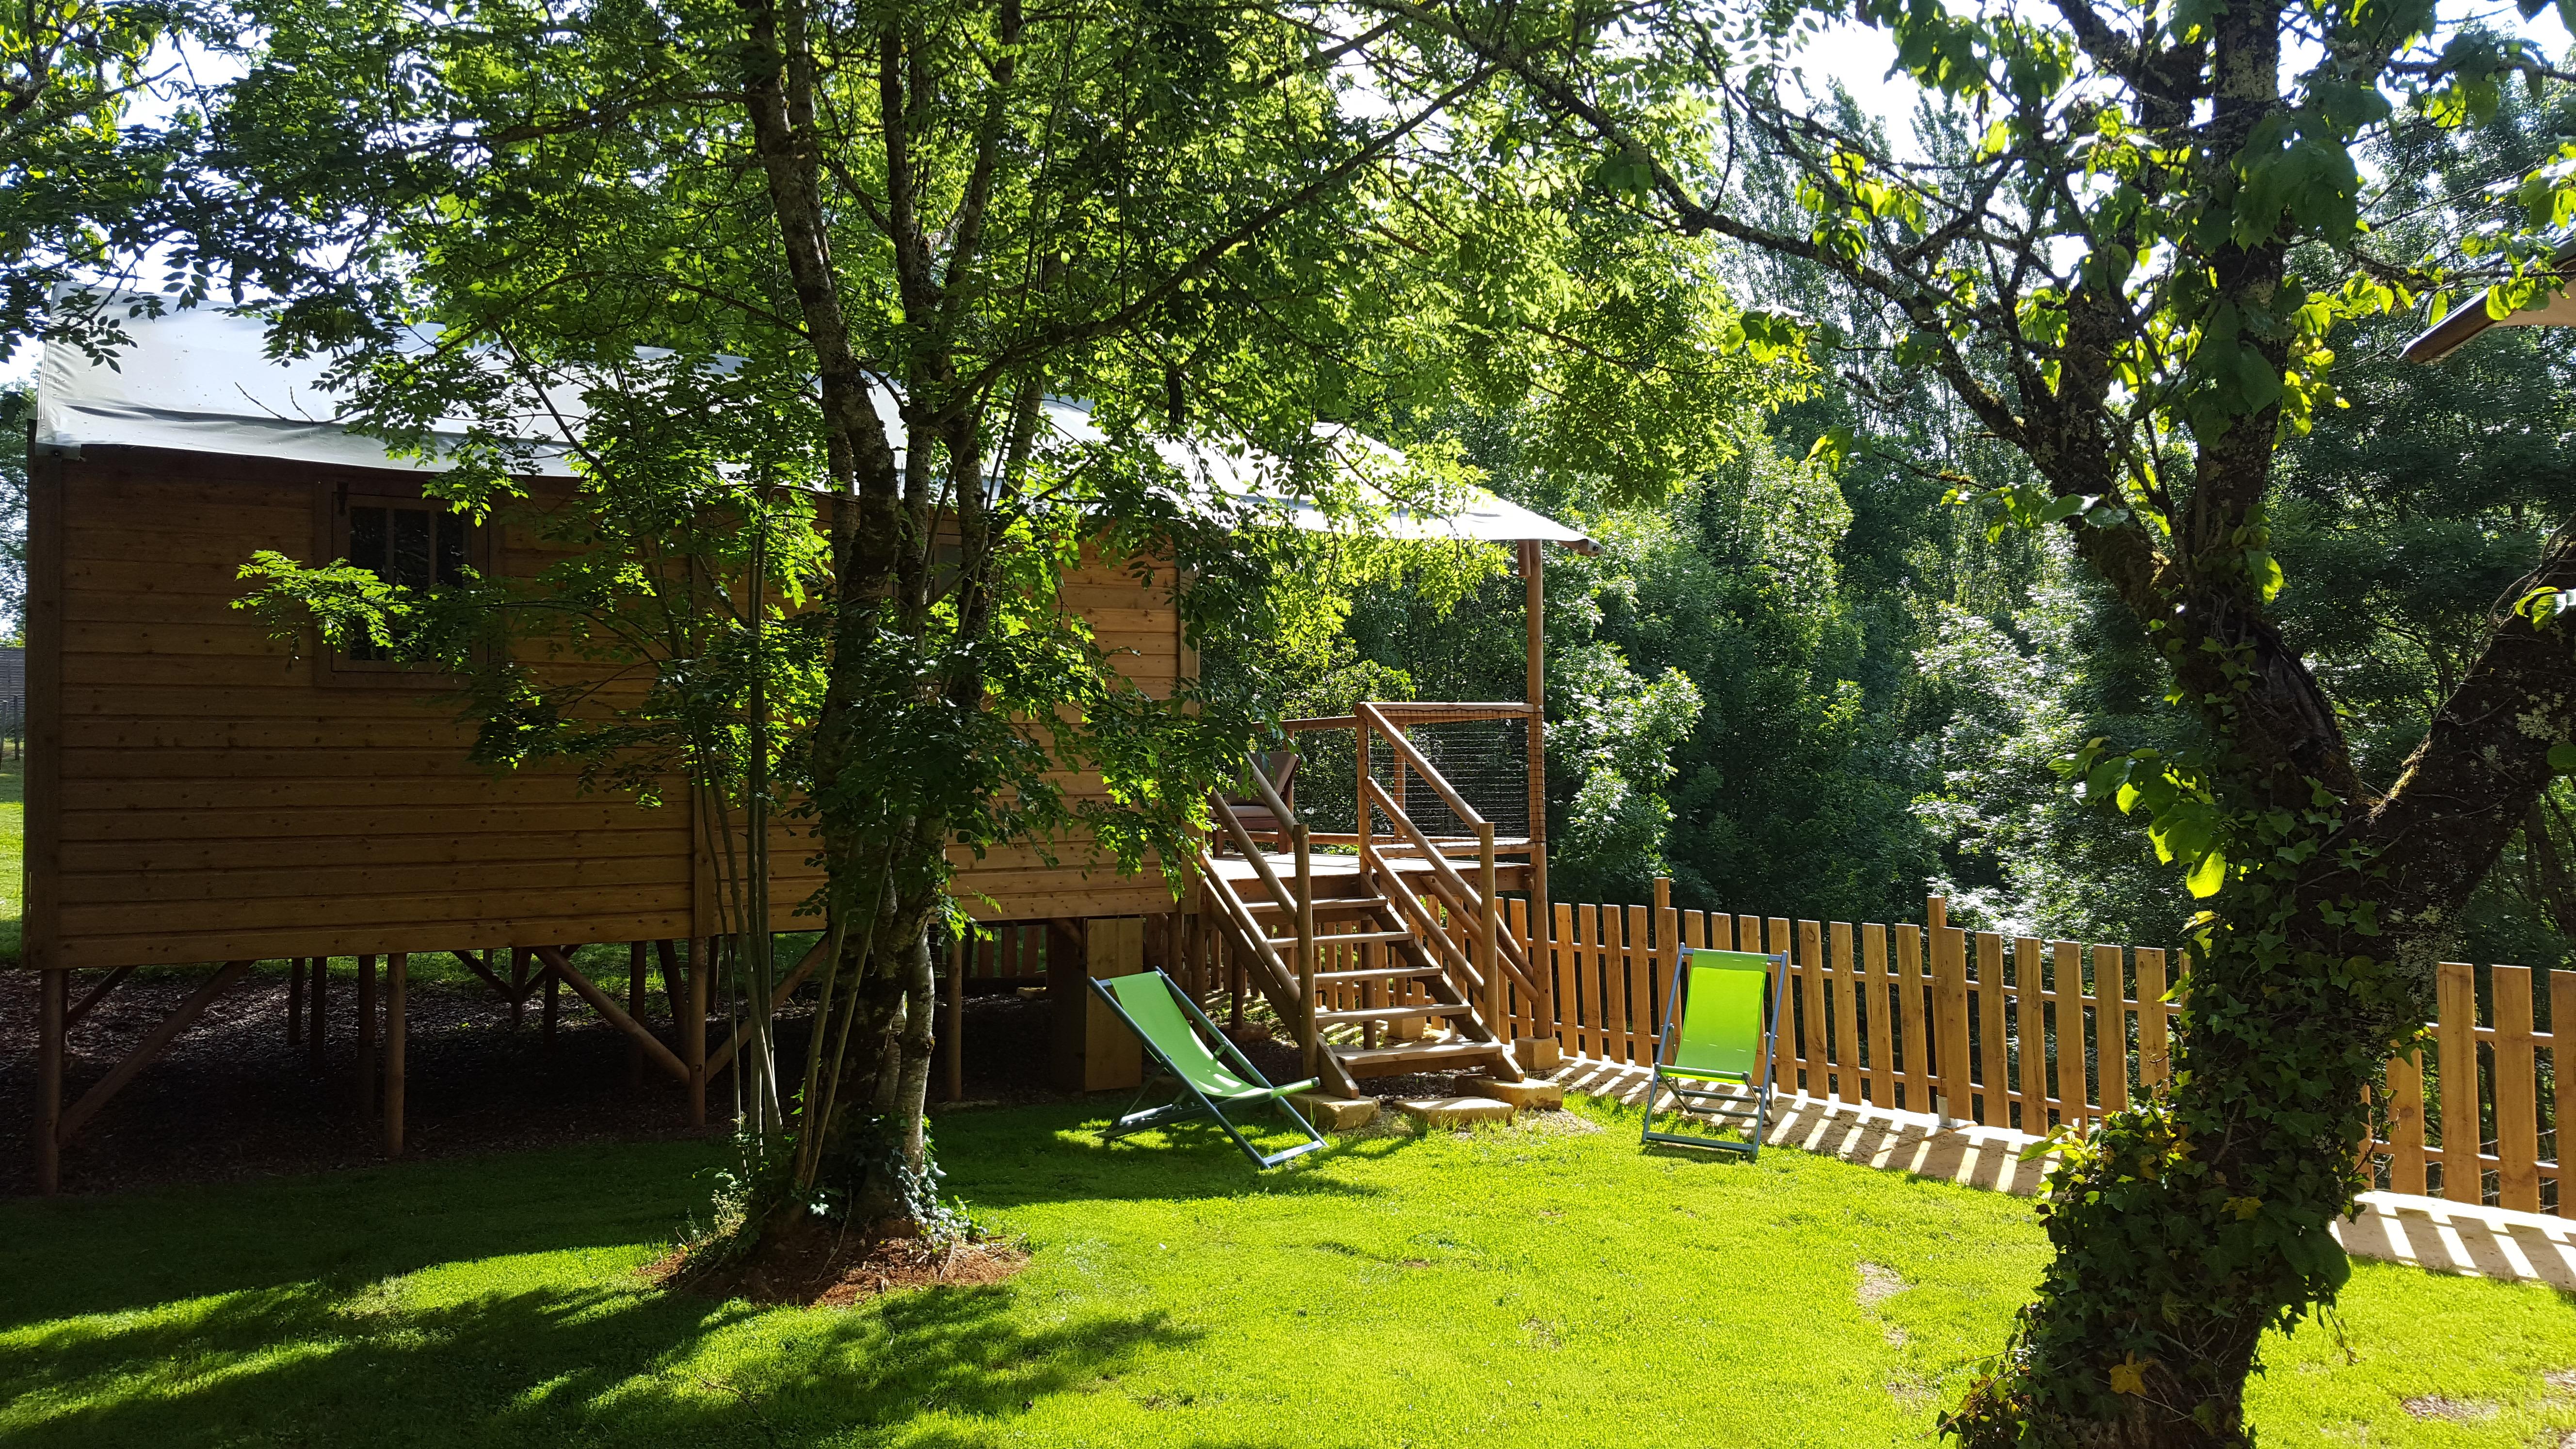 Accommodation - Wooden Cabin Lodge Perched 39M² 2 Bedrooms 5 People - Rental From Saturday To Saturday In July And August. - Camping L'Offrerie